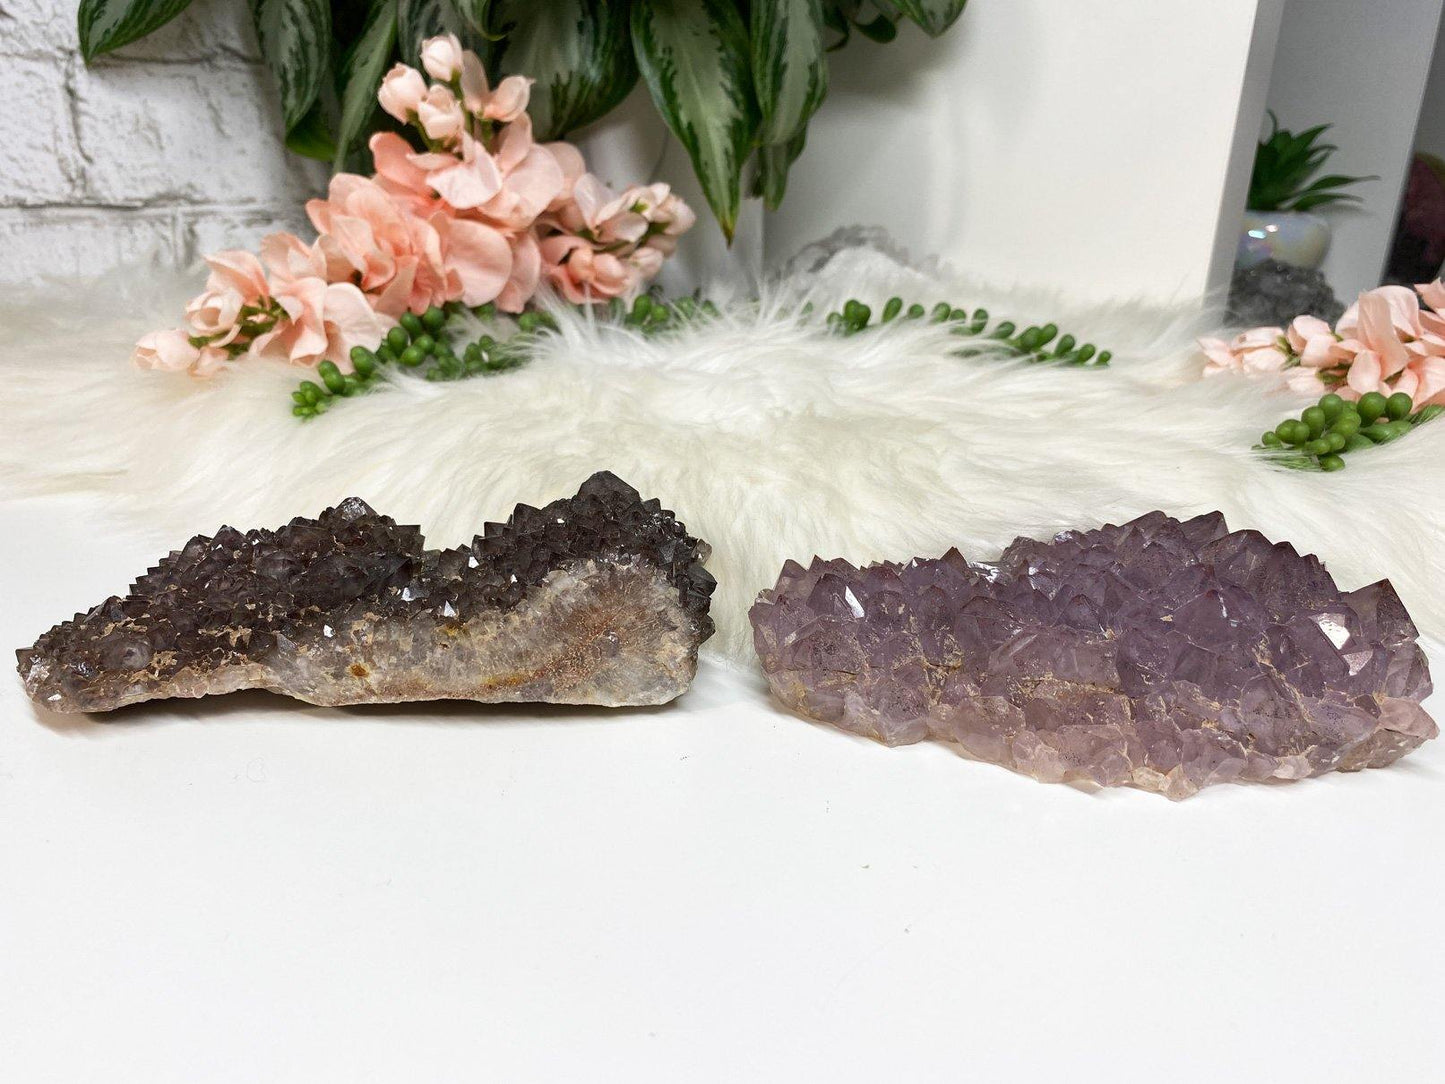 Unique Auralite 23 crystal clusters from Northern Canada. These pieces are beautiful and quite powerful in crystal world. They are mostly made up of amethyst, citrine, and green quartz, but are also mixed with a wide variety of other minerals.